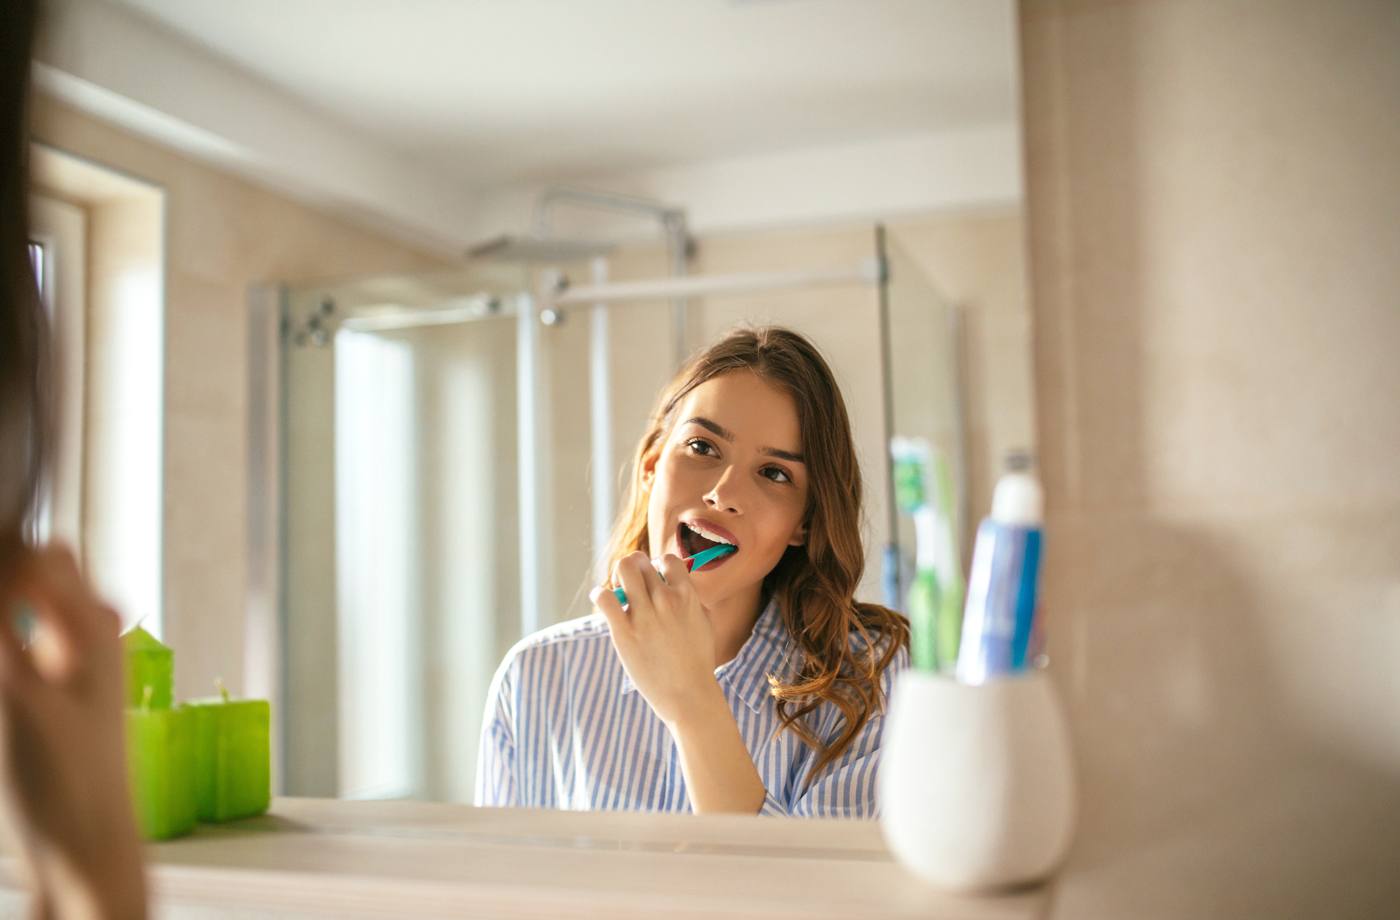 Triclosan in toothpaste could hurt gut health